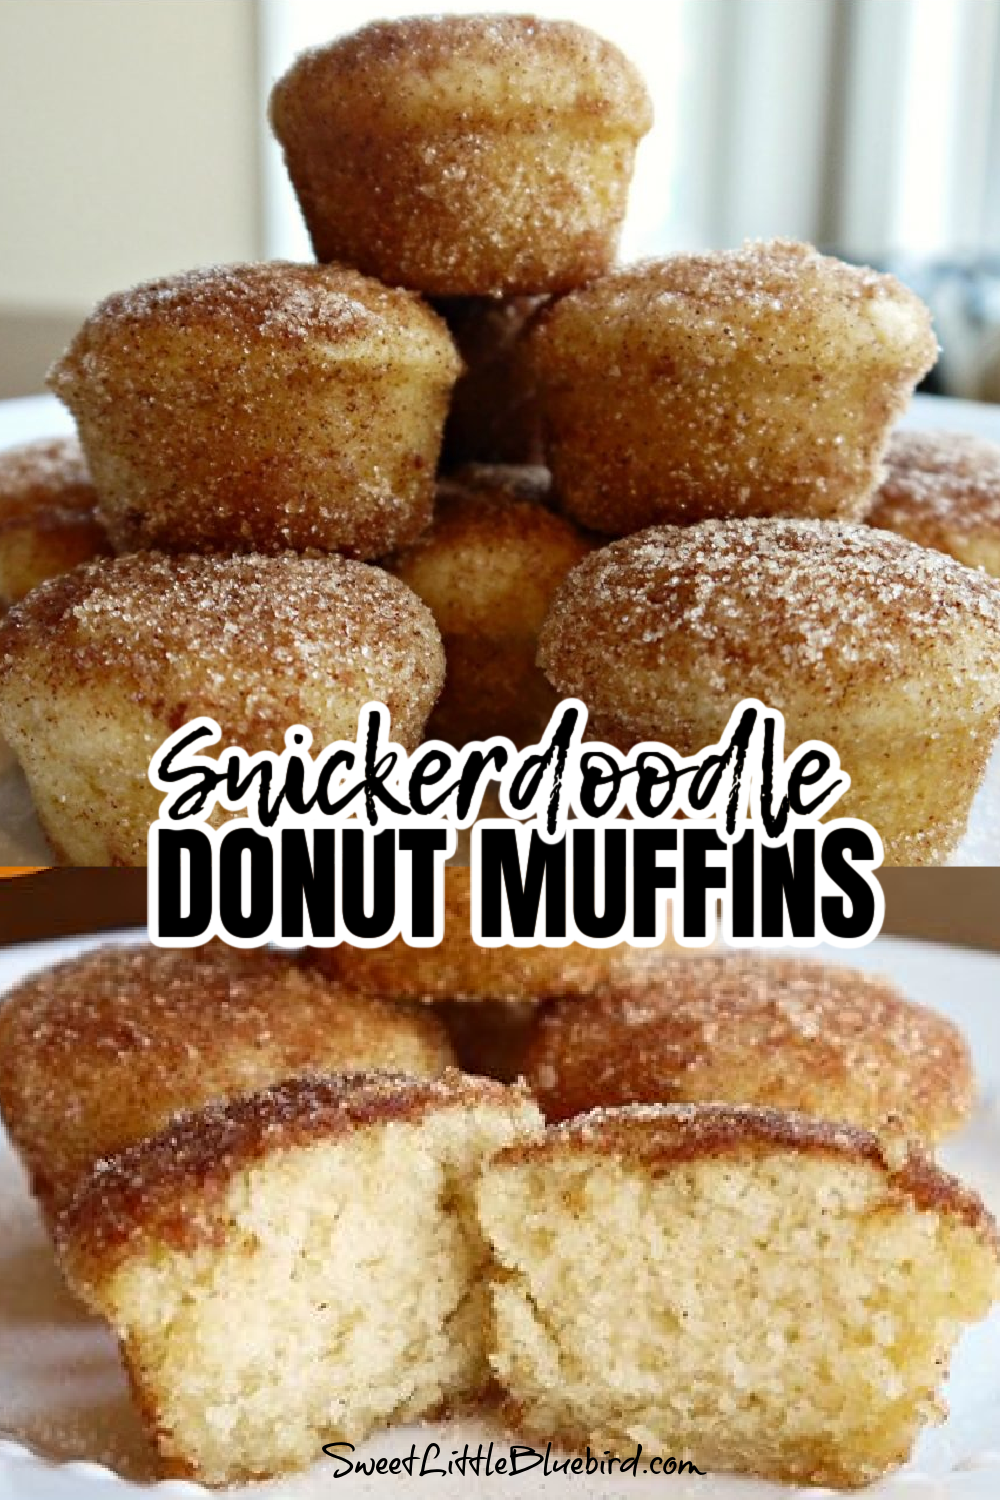 This is a two photo collage showing the Snickerdoodle Donut Muffins stacked on a plate. Bottom photo shows a donut cut in half, showing the inside. 